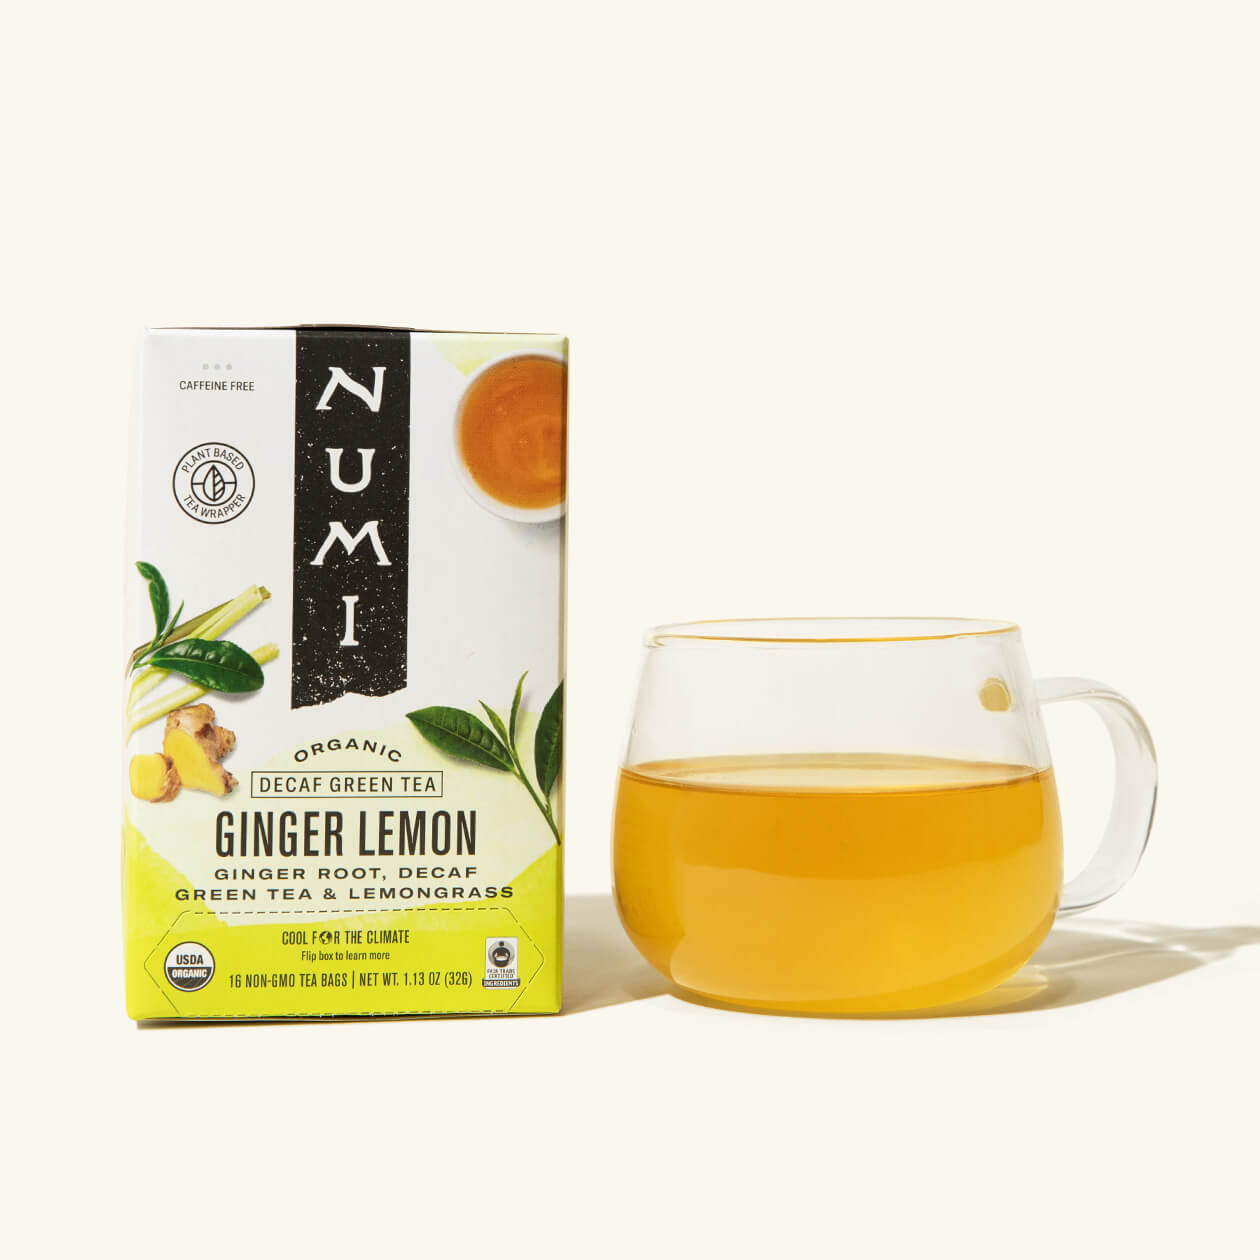 A box of Numi's Ginger Lemon next to a brewed cup of tea in a clear cup